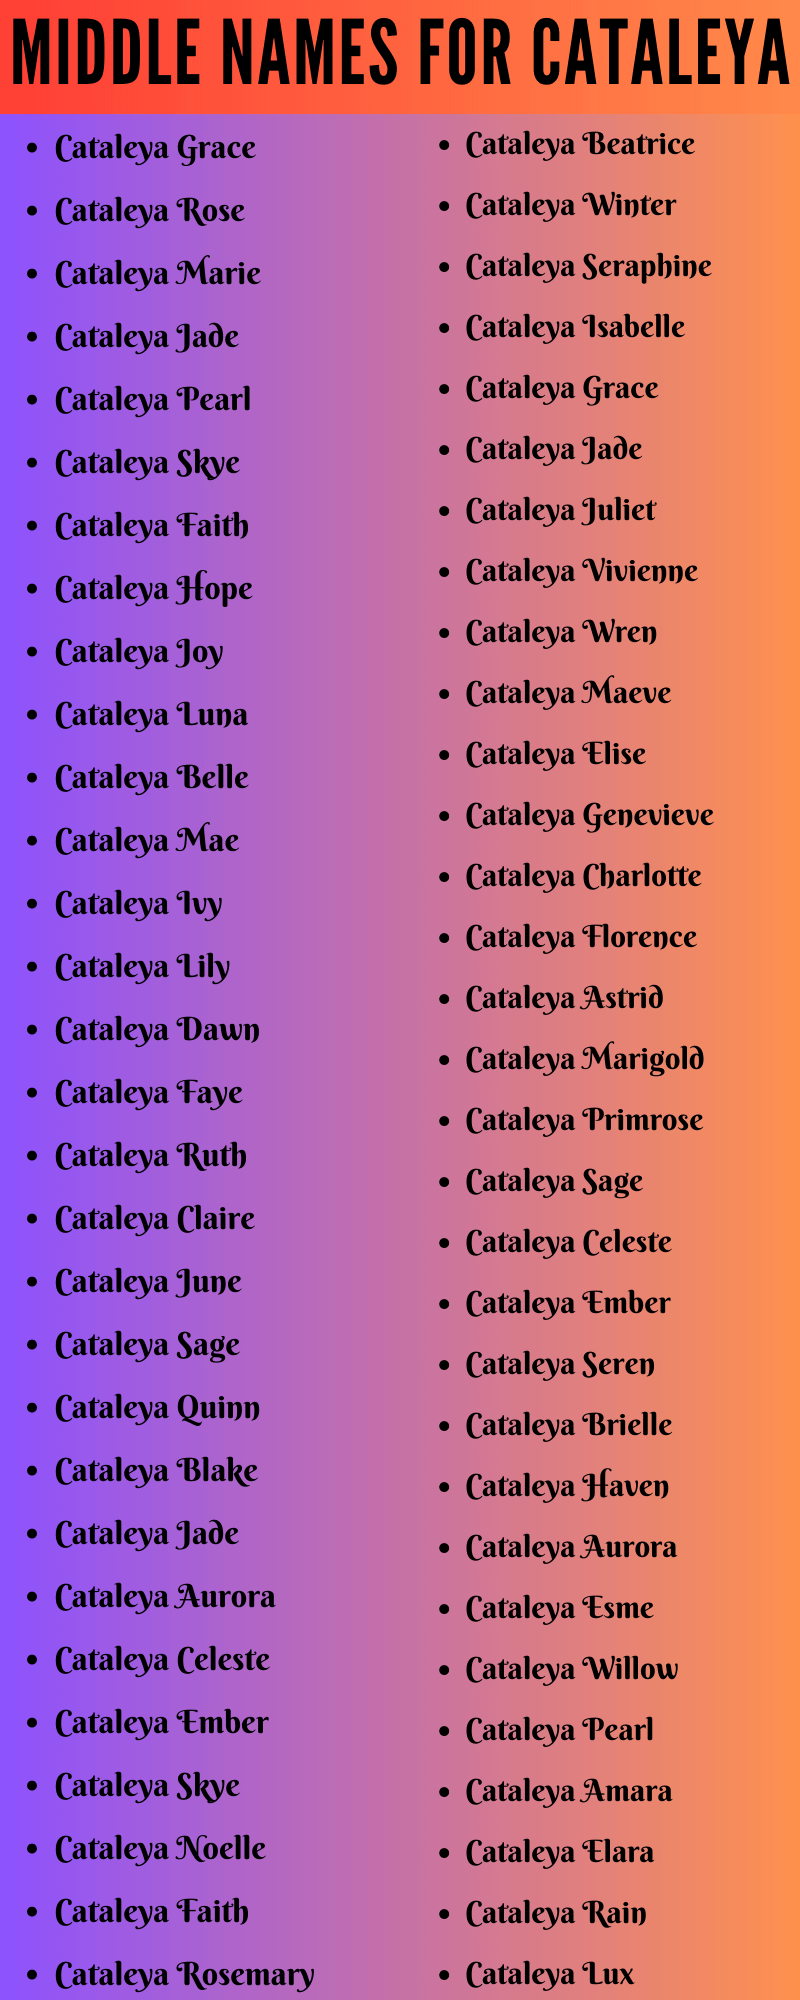 400 Classy Middle Names For Cataleya